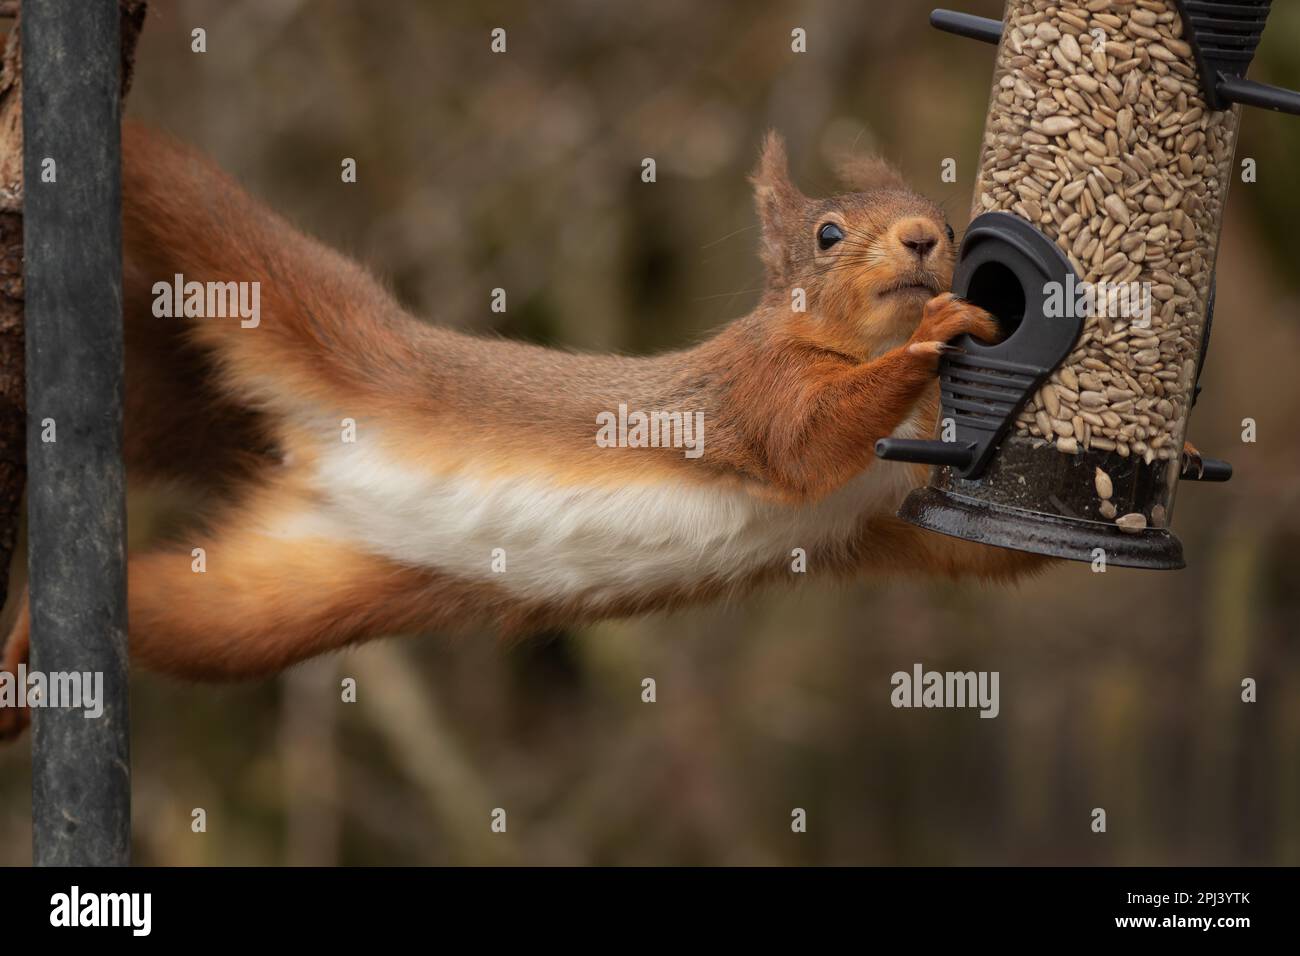 an amusing funny image of a red squirrel as it stretches from a treen over to a bird feeder as it steals the food from a bird feeder Stock Photo